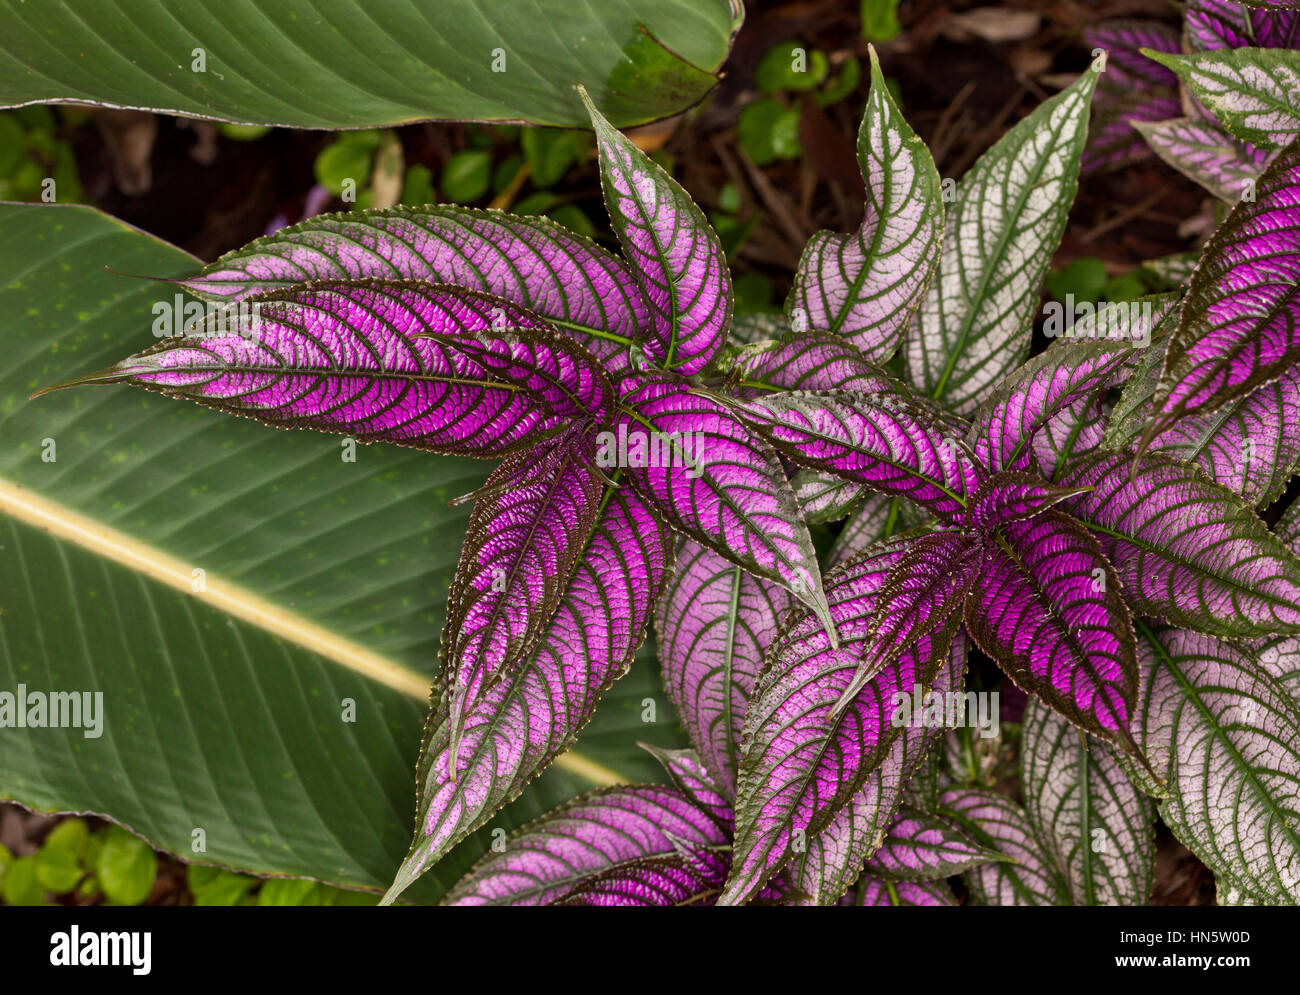 Cluster of vivid purple and ornately patterned leaves of Strobilanthes dyeriana, Persian shield plant Stock Photo